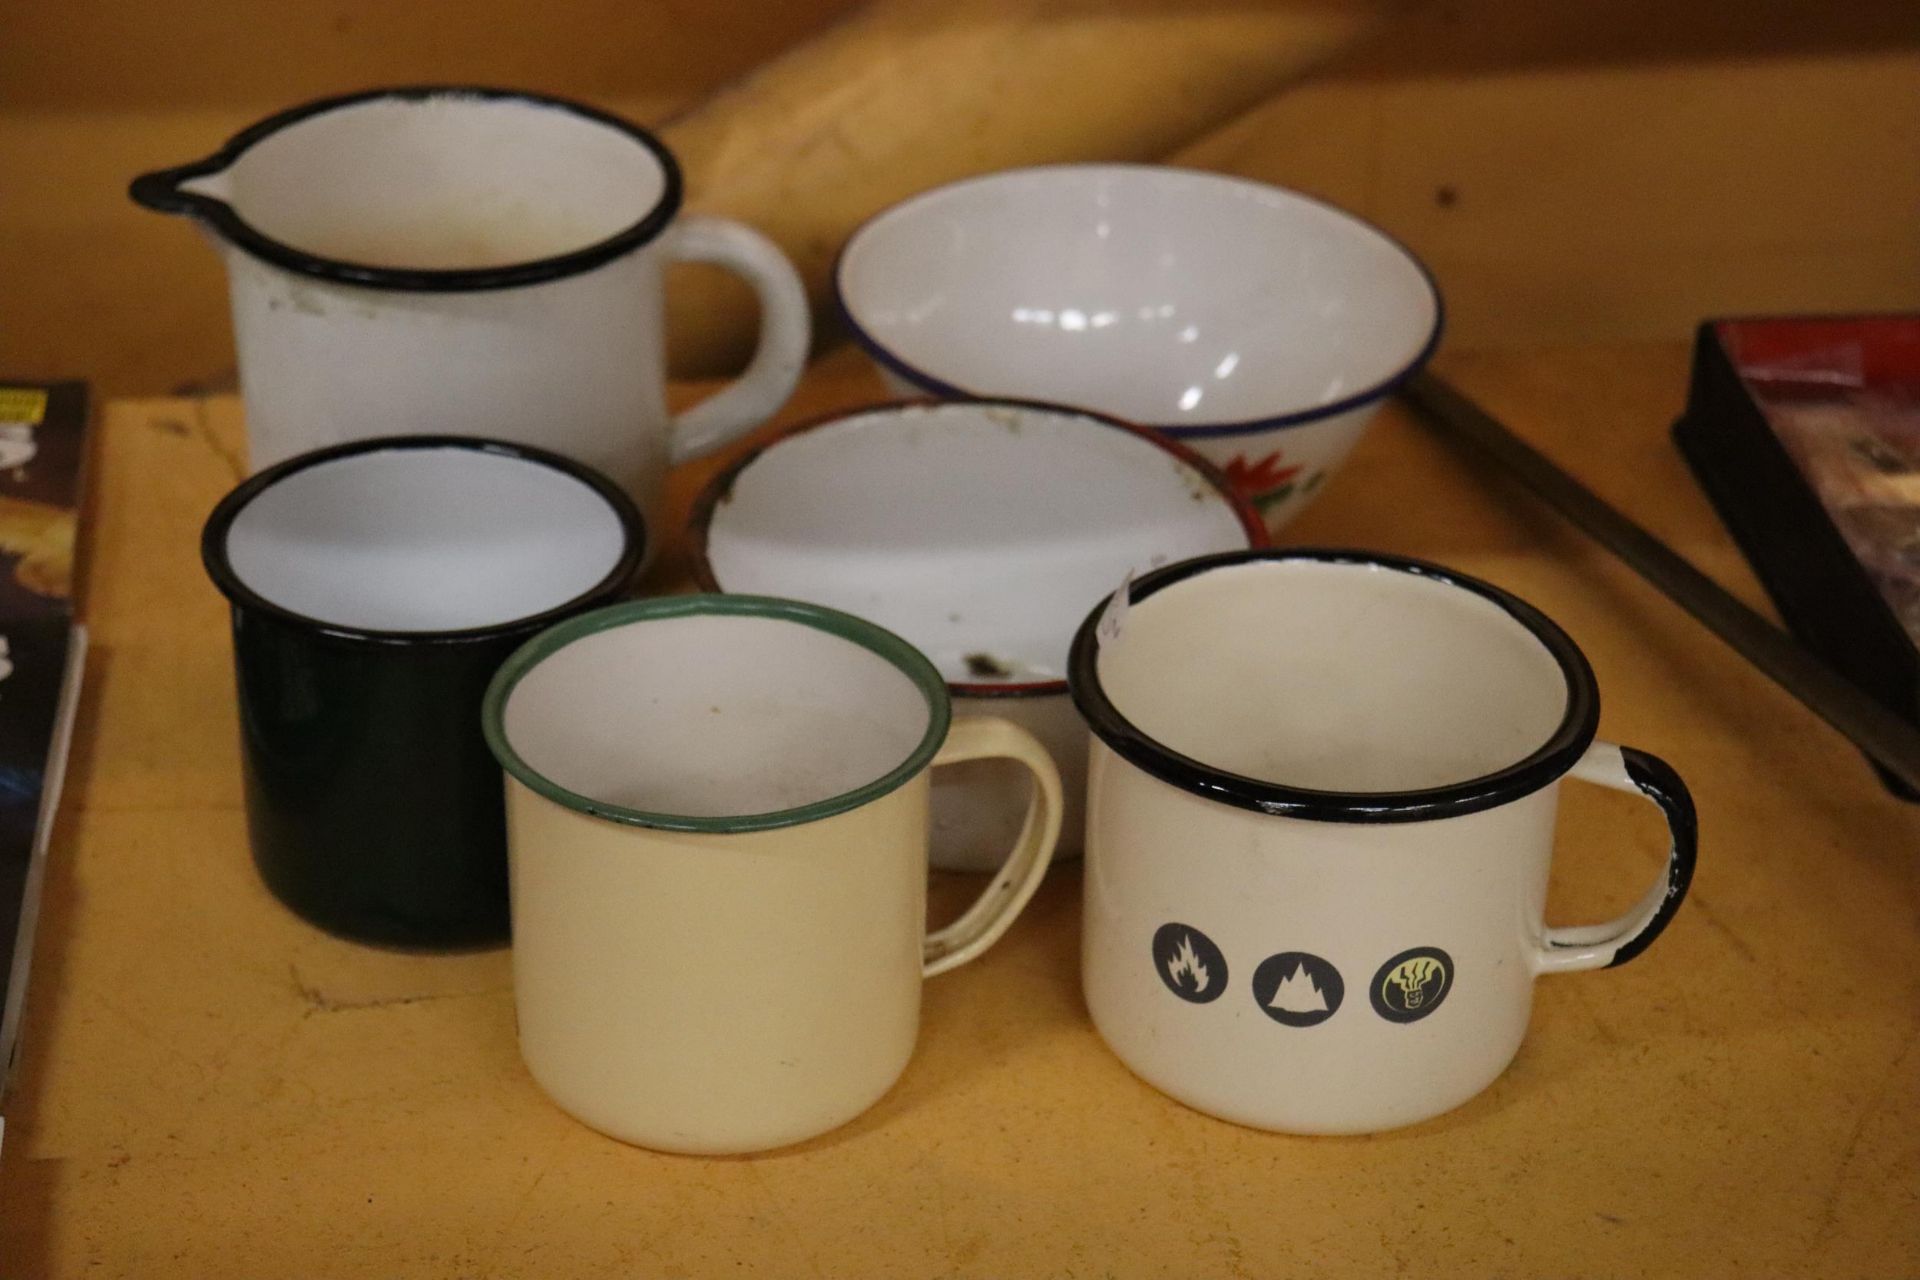 A QUANTITY OF VINTAGE ENAMEL CUPS AND BOWLS - 6 IN TOTAL